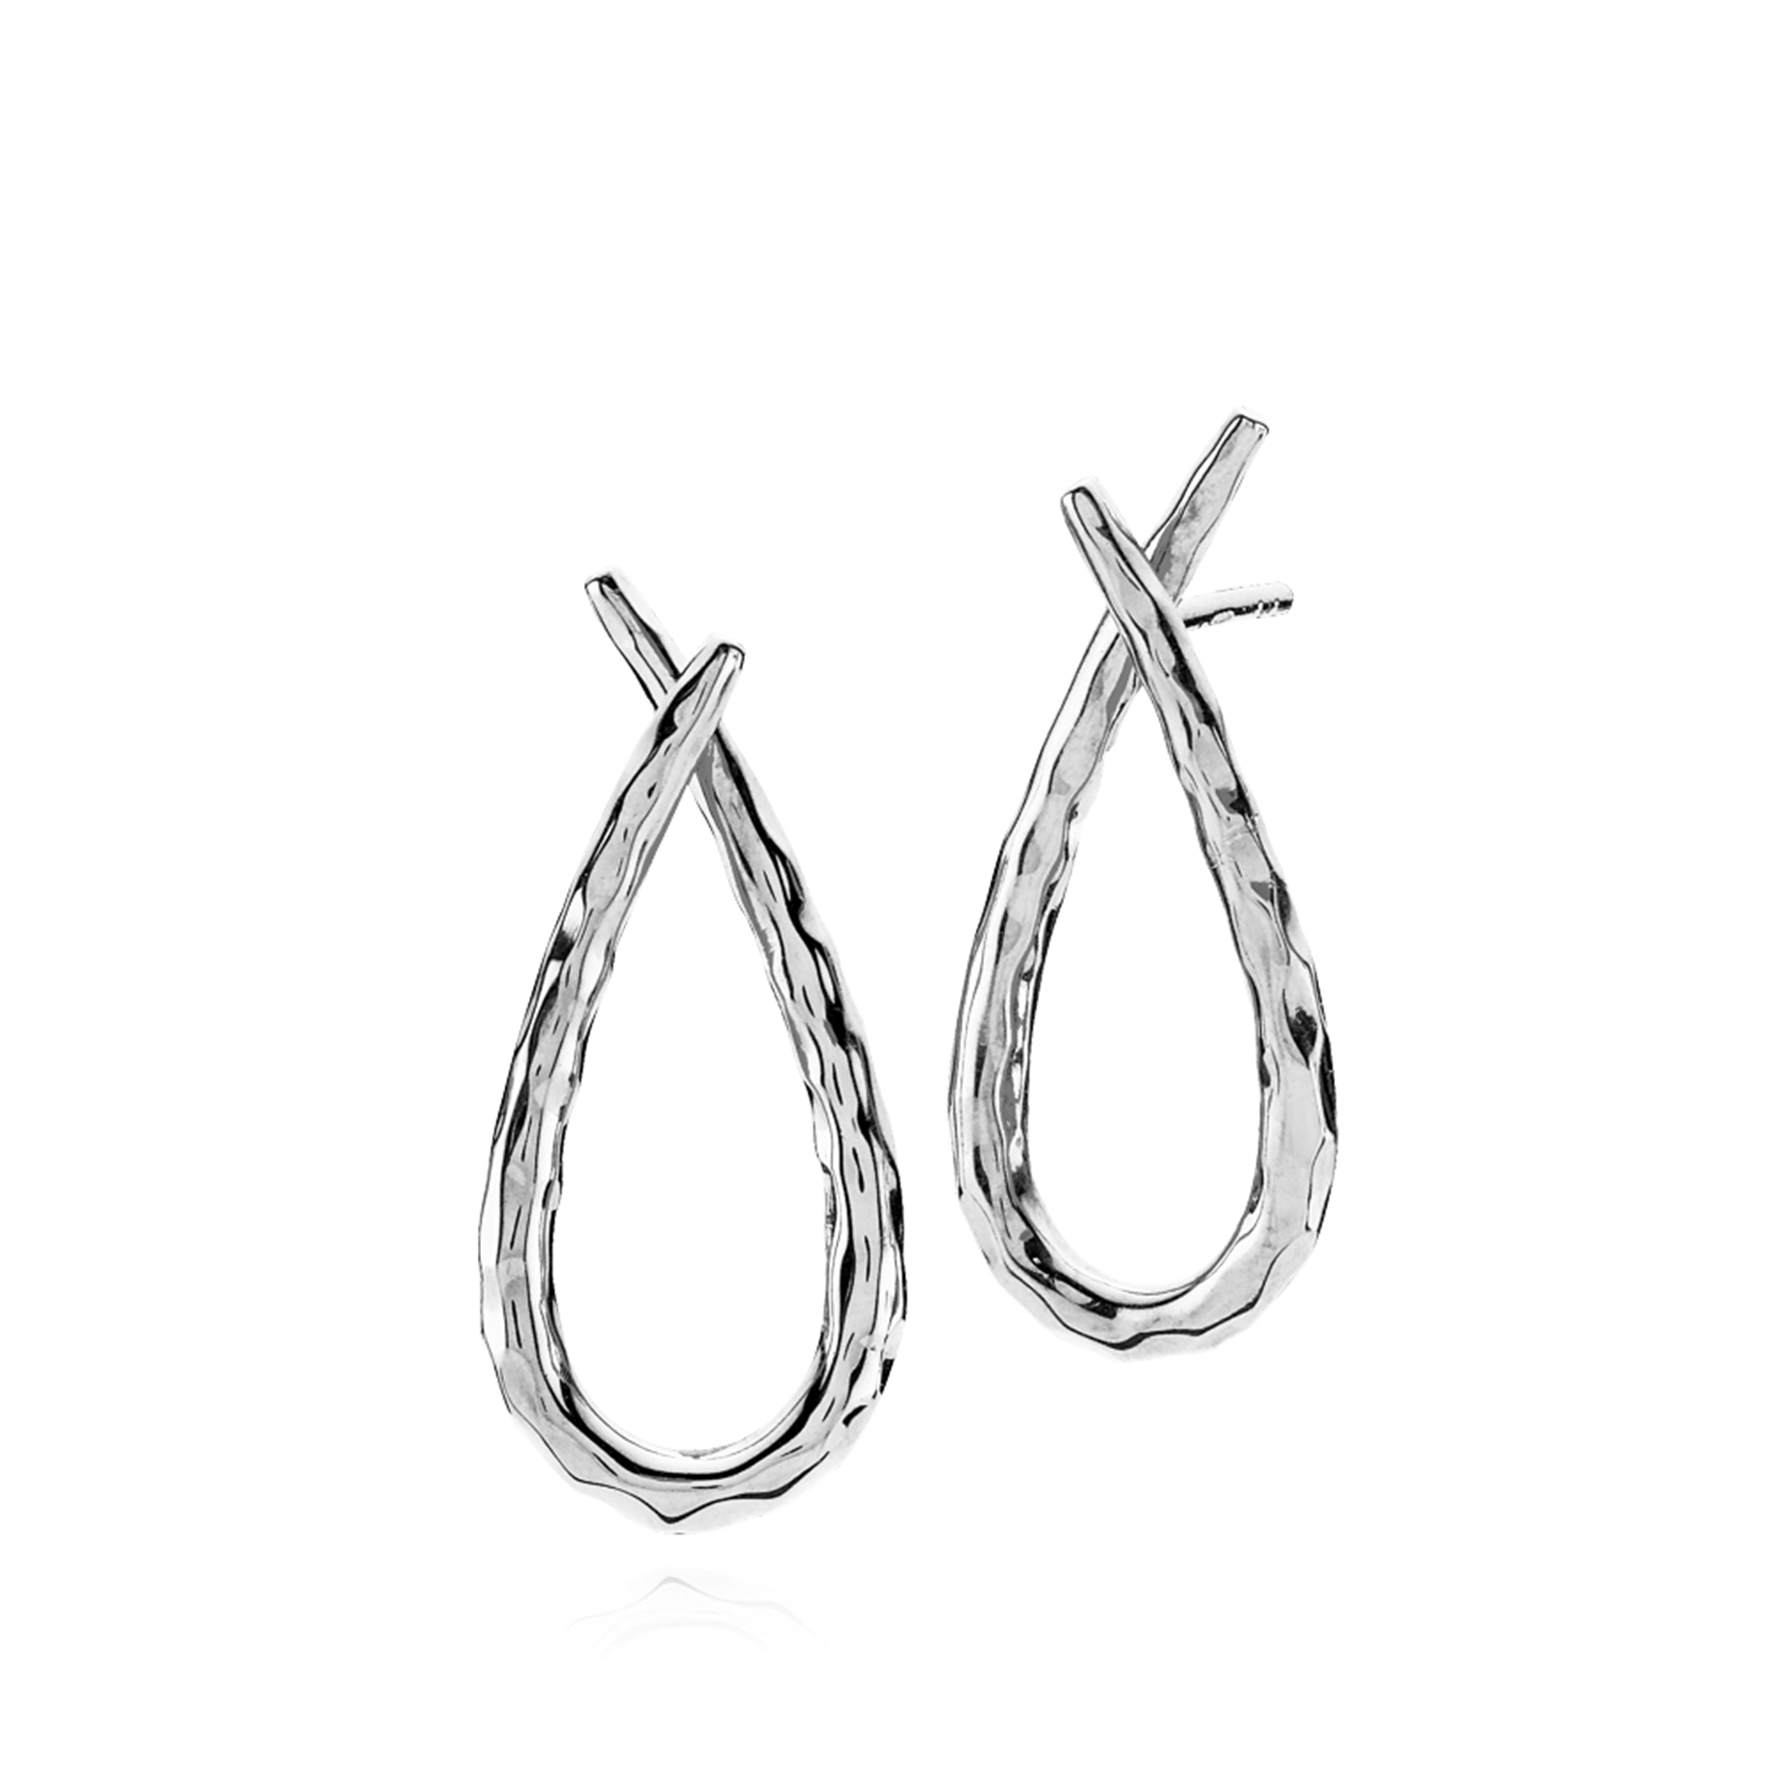 Attitude Hammered Earrings from Izabel Camille in Silver Sterling 925